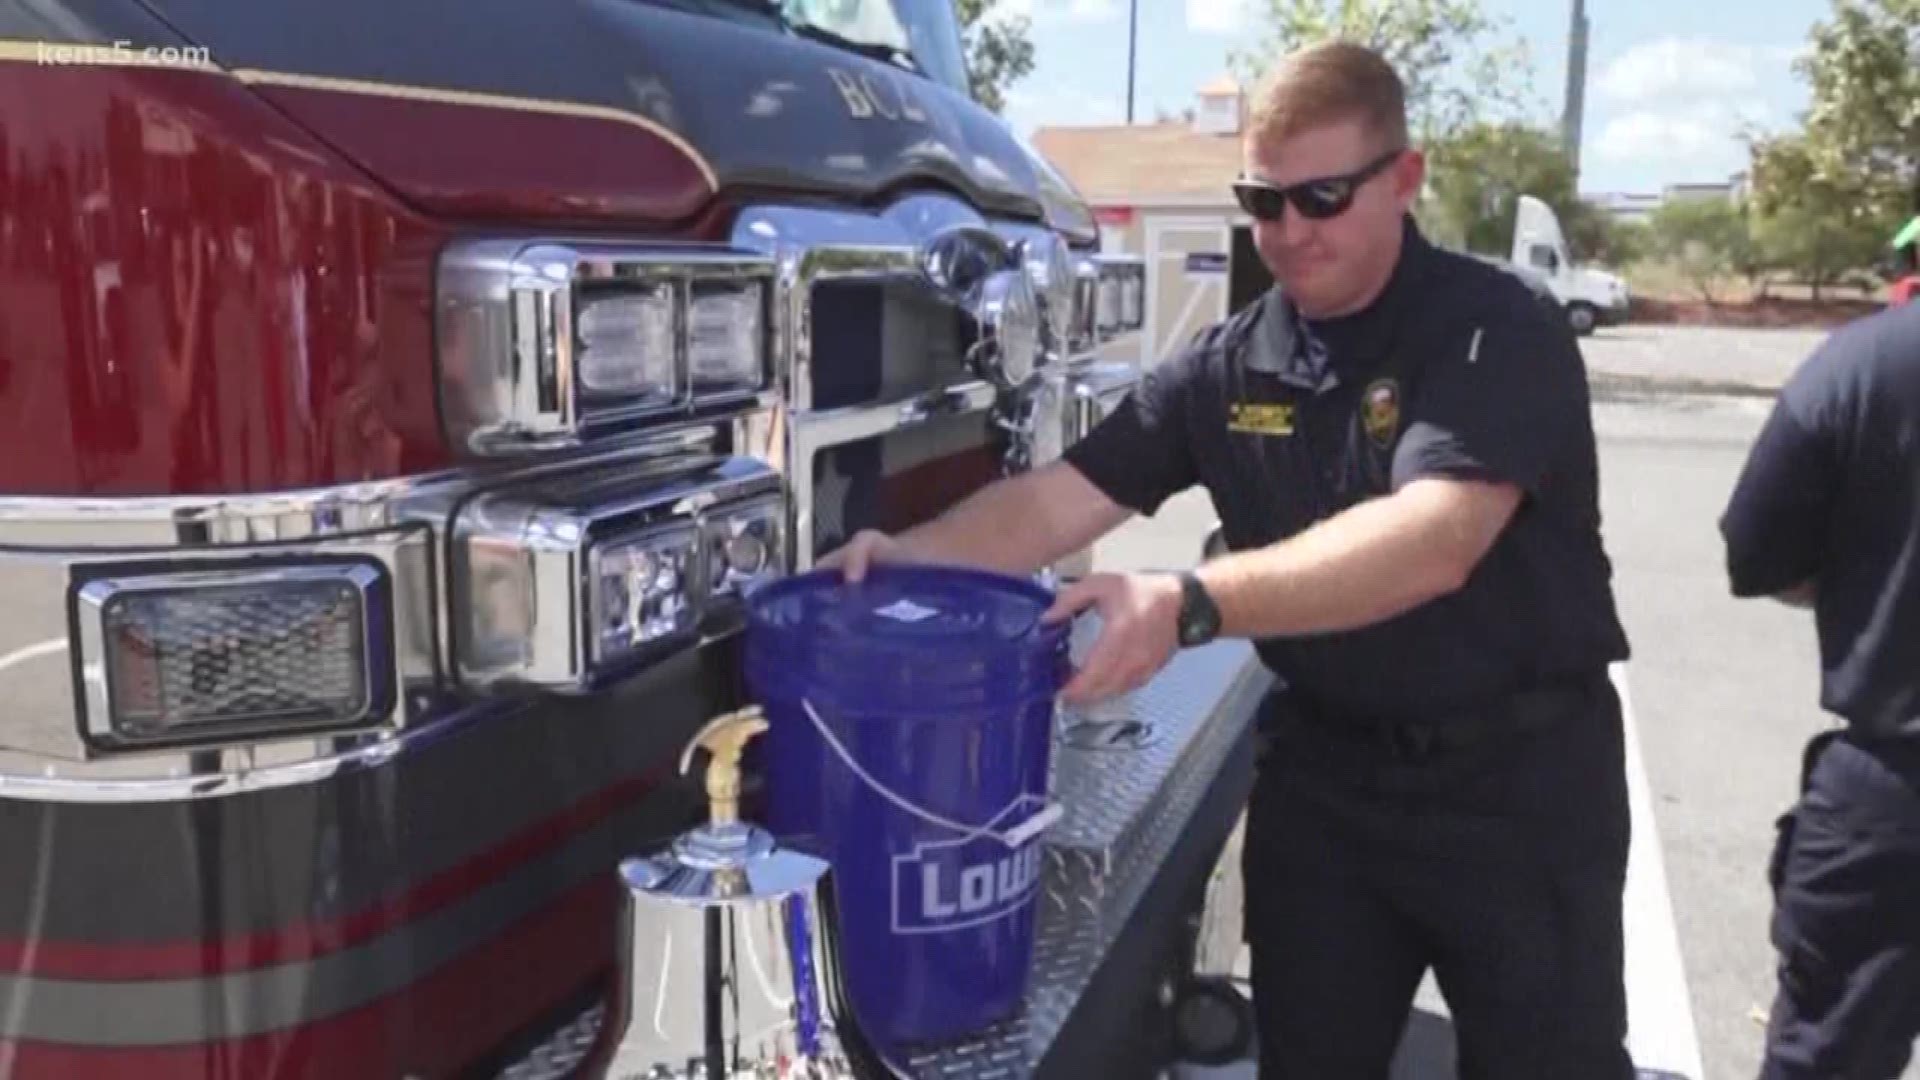 Bexar County ESD 2 fire trucks will now all be outfitted with buckets, cleaning solution and equipment so they can scrub and spray suits and skin after fighting fire